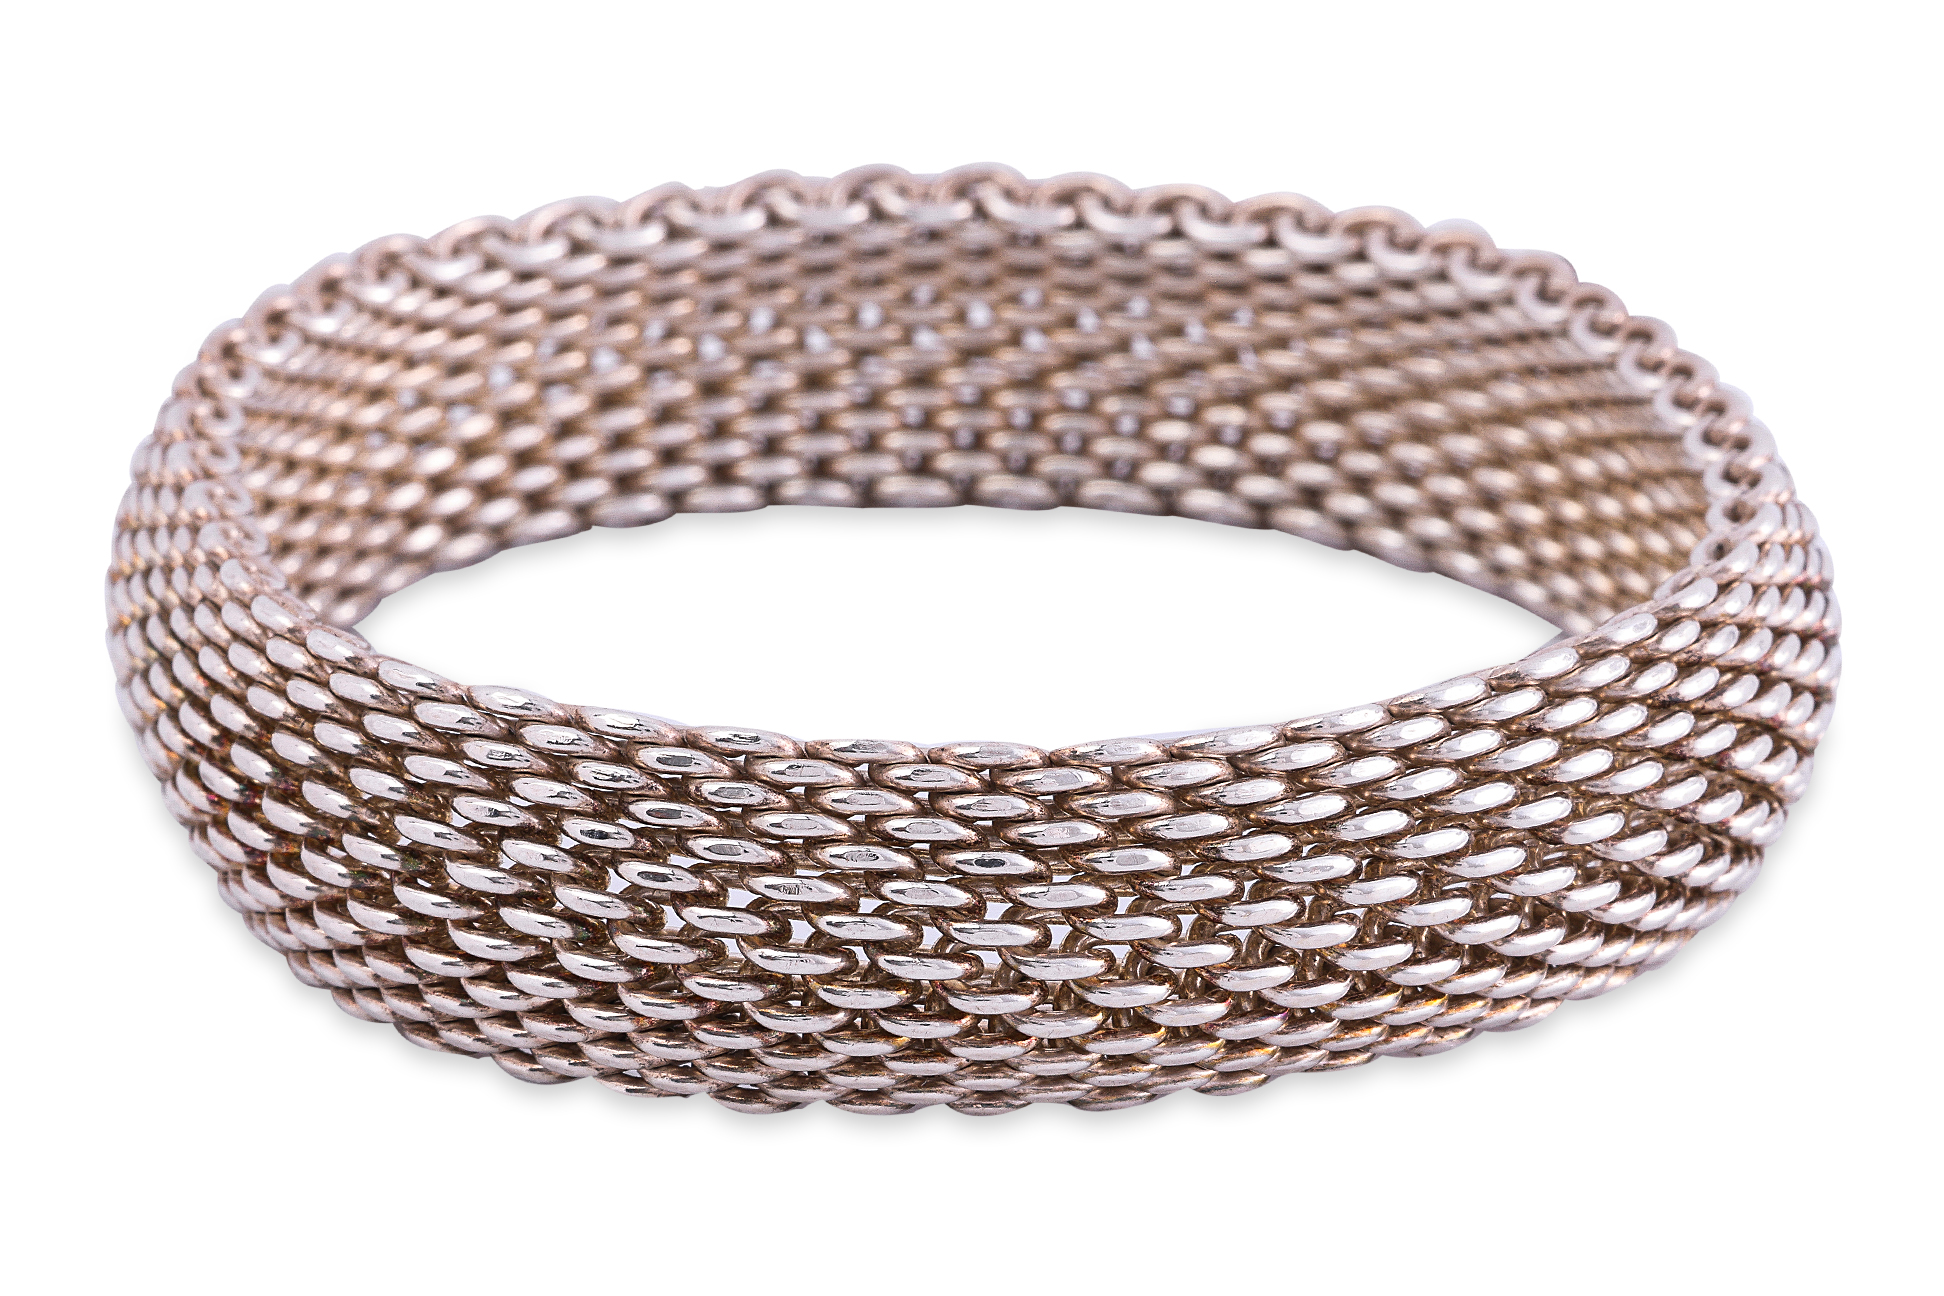 A TIFFANY & CO. SILVER MESH BRACELET AND RING - Image 2 of 7